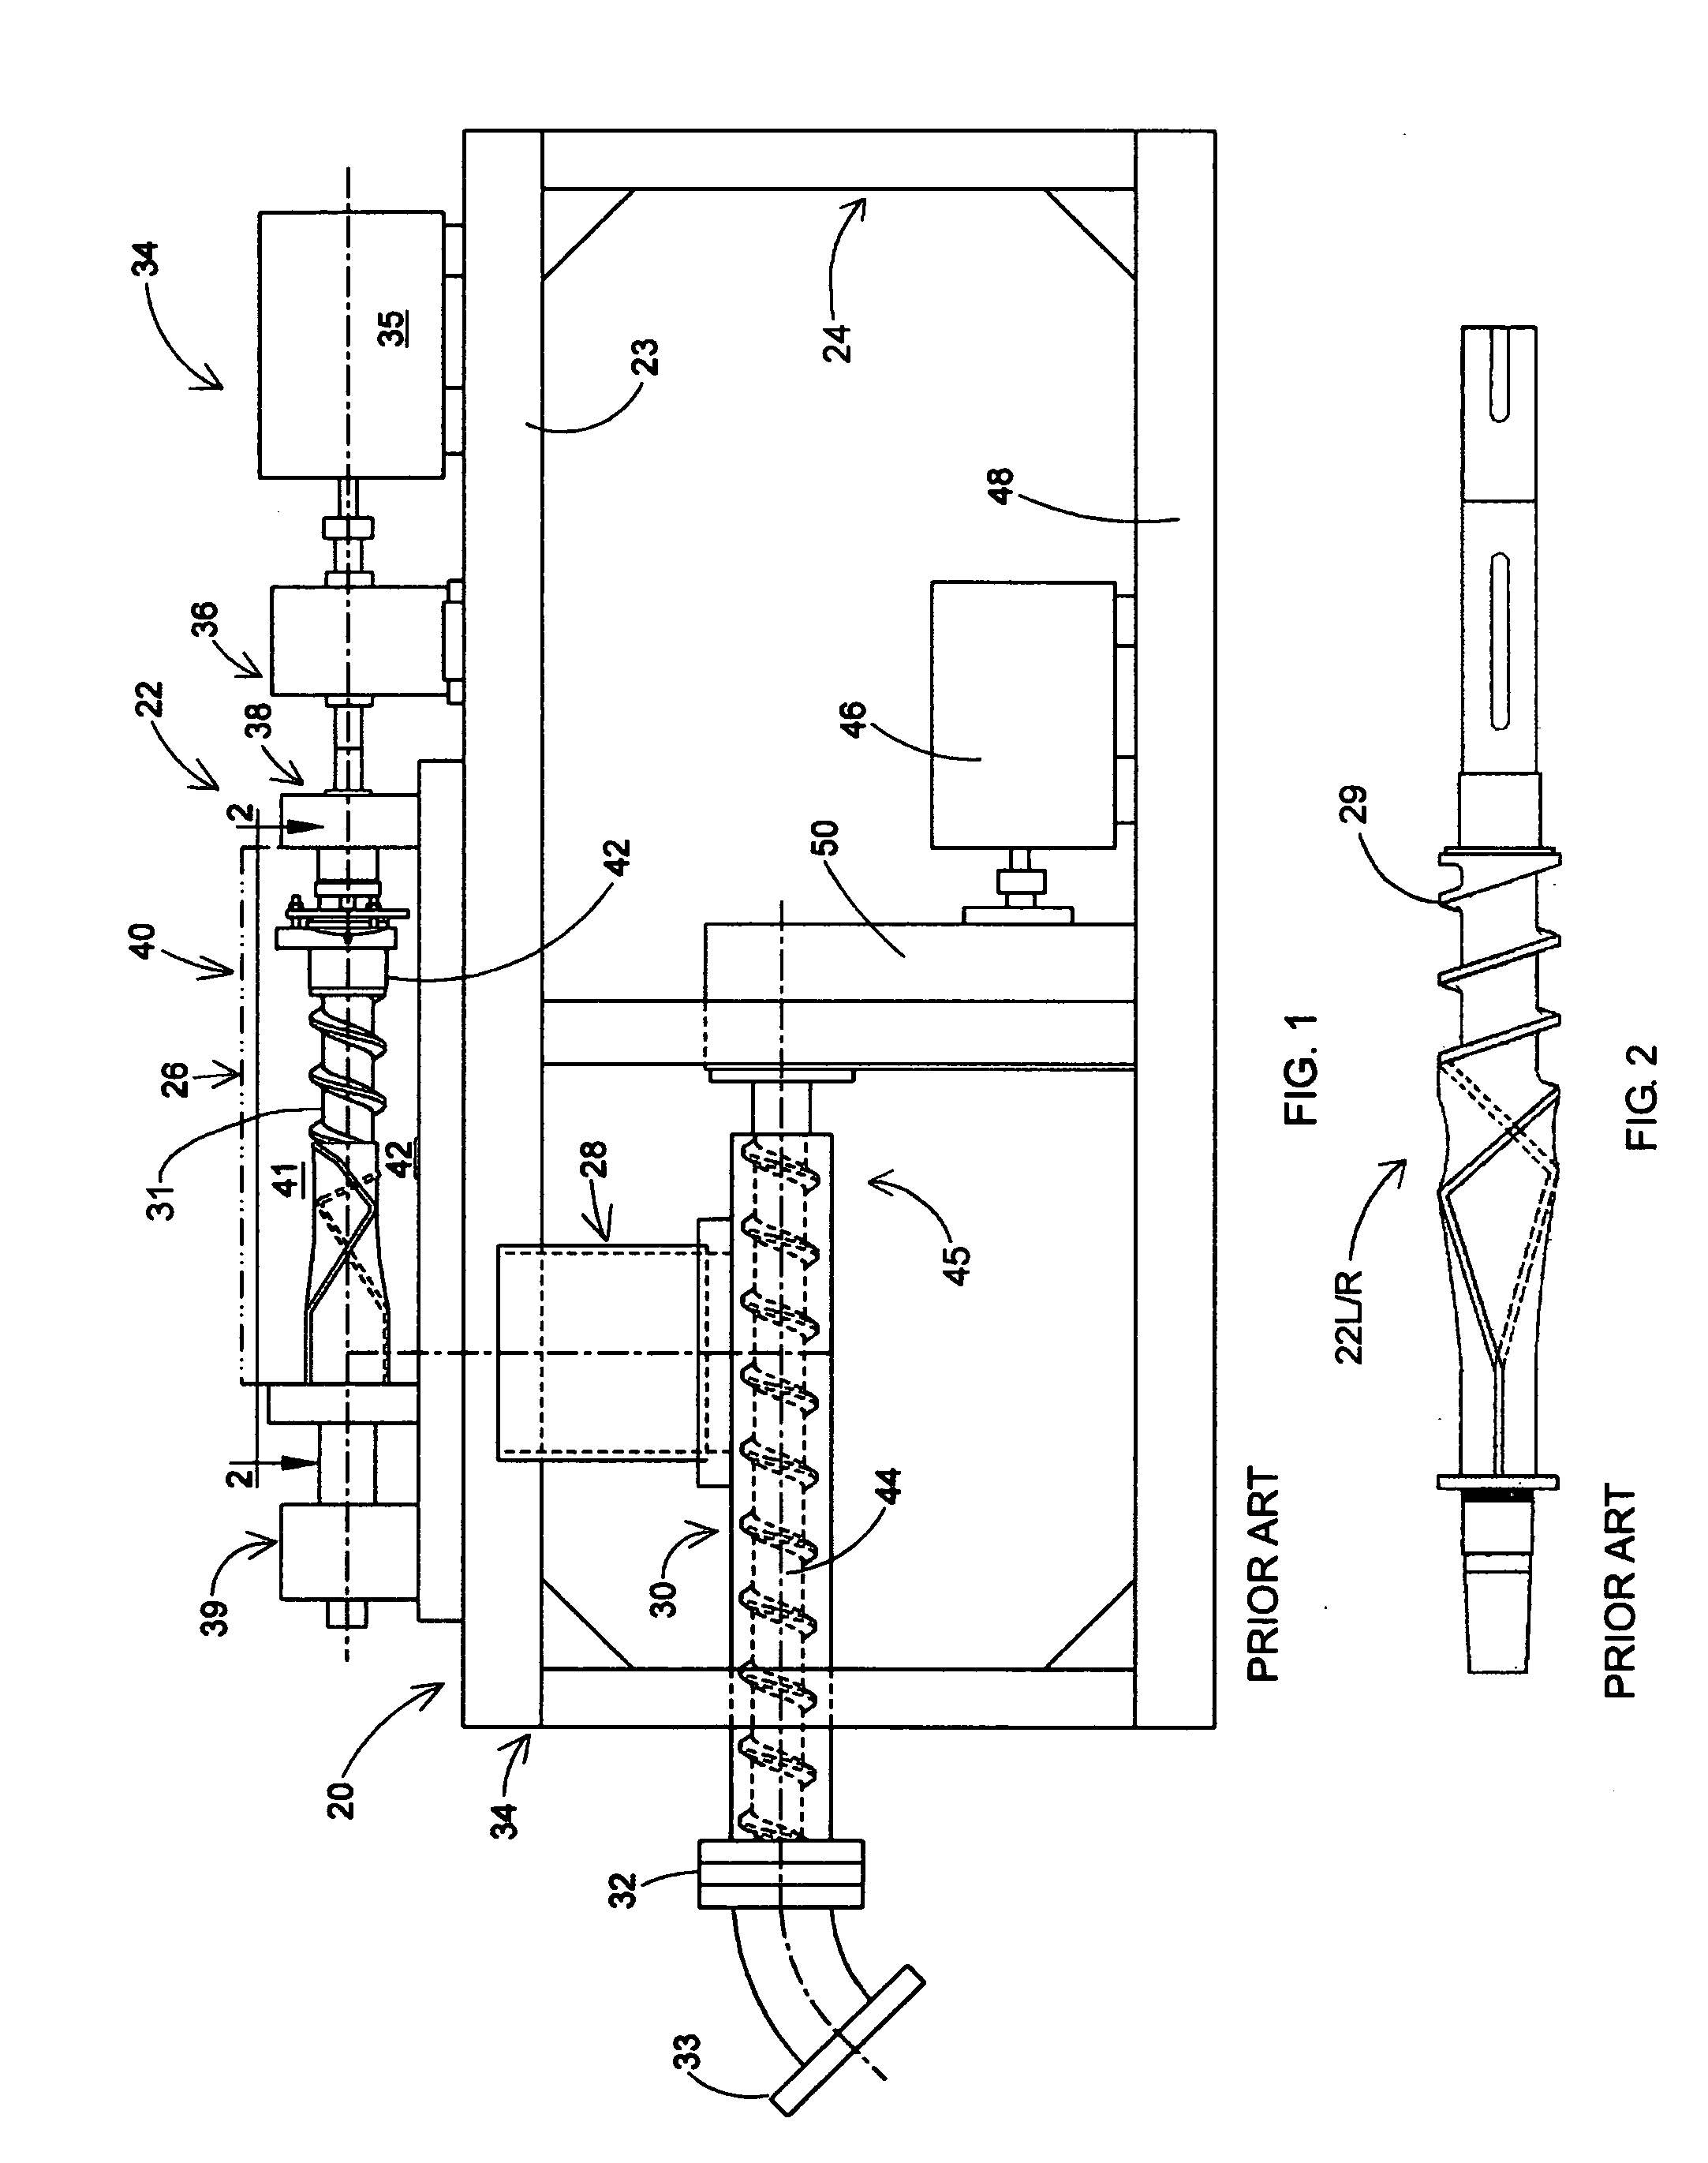 Dual flight rotors for continuous mixer assembly